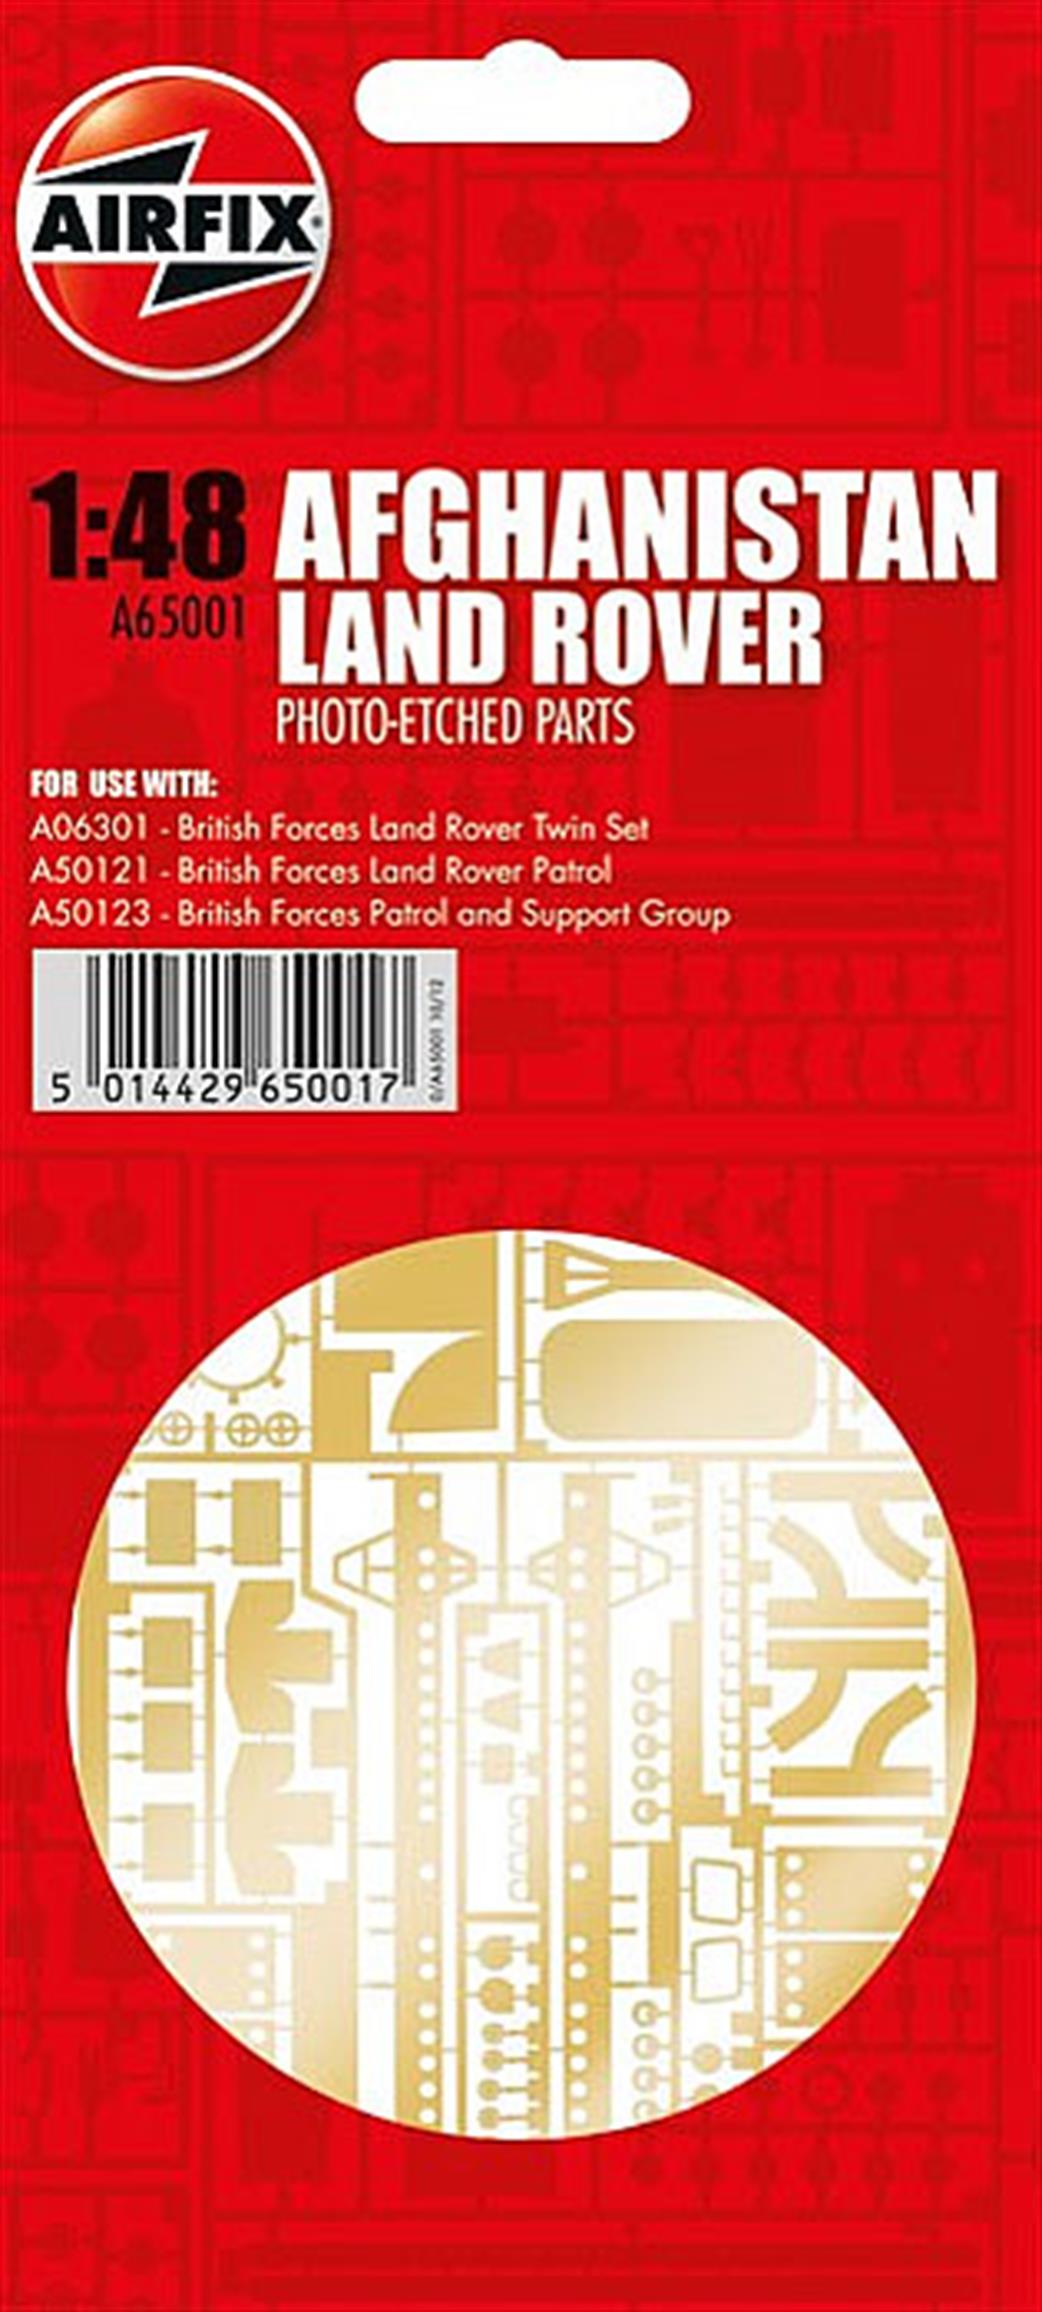 Airfix 1/48 A65001 British Forces Land Rover Photo Etched Parts